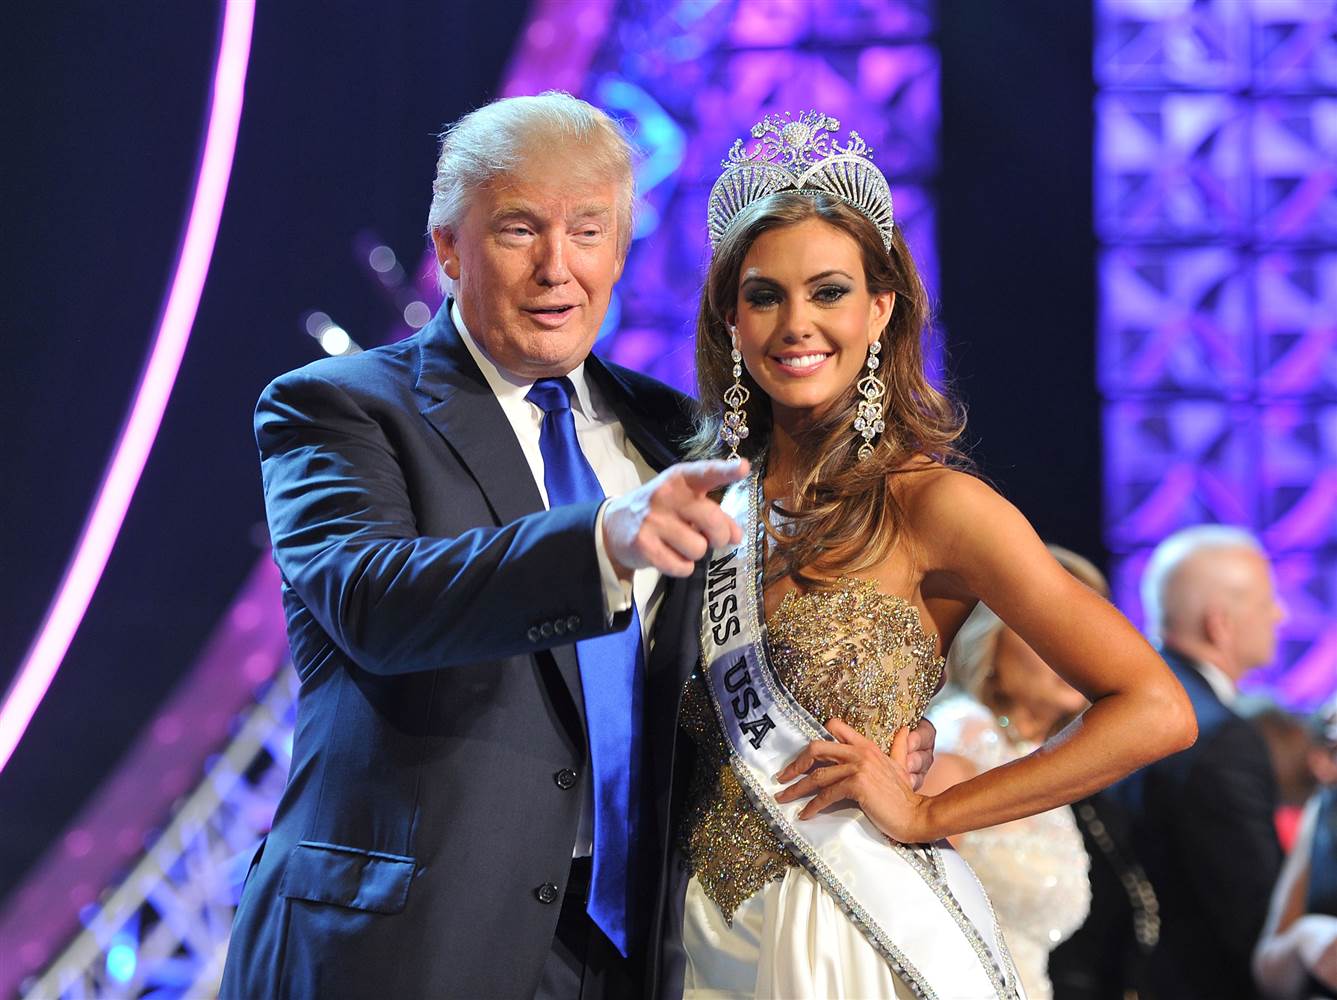 The Miss Trump 2016 Pageant